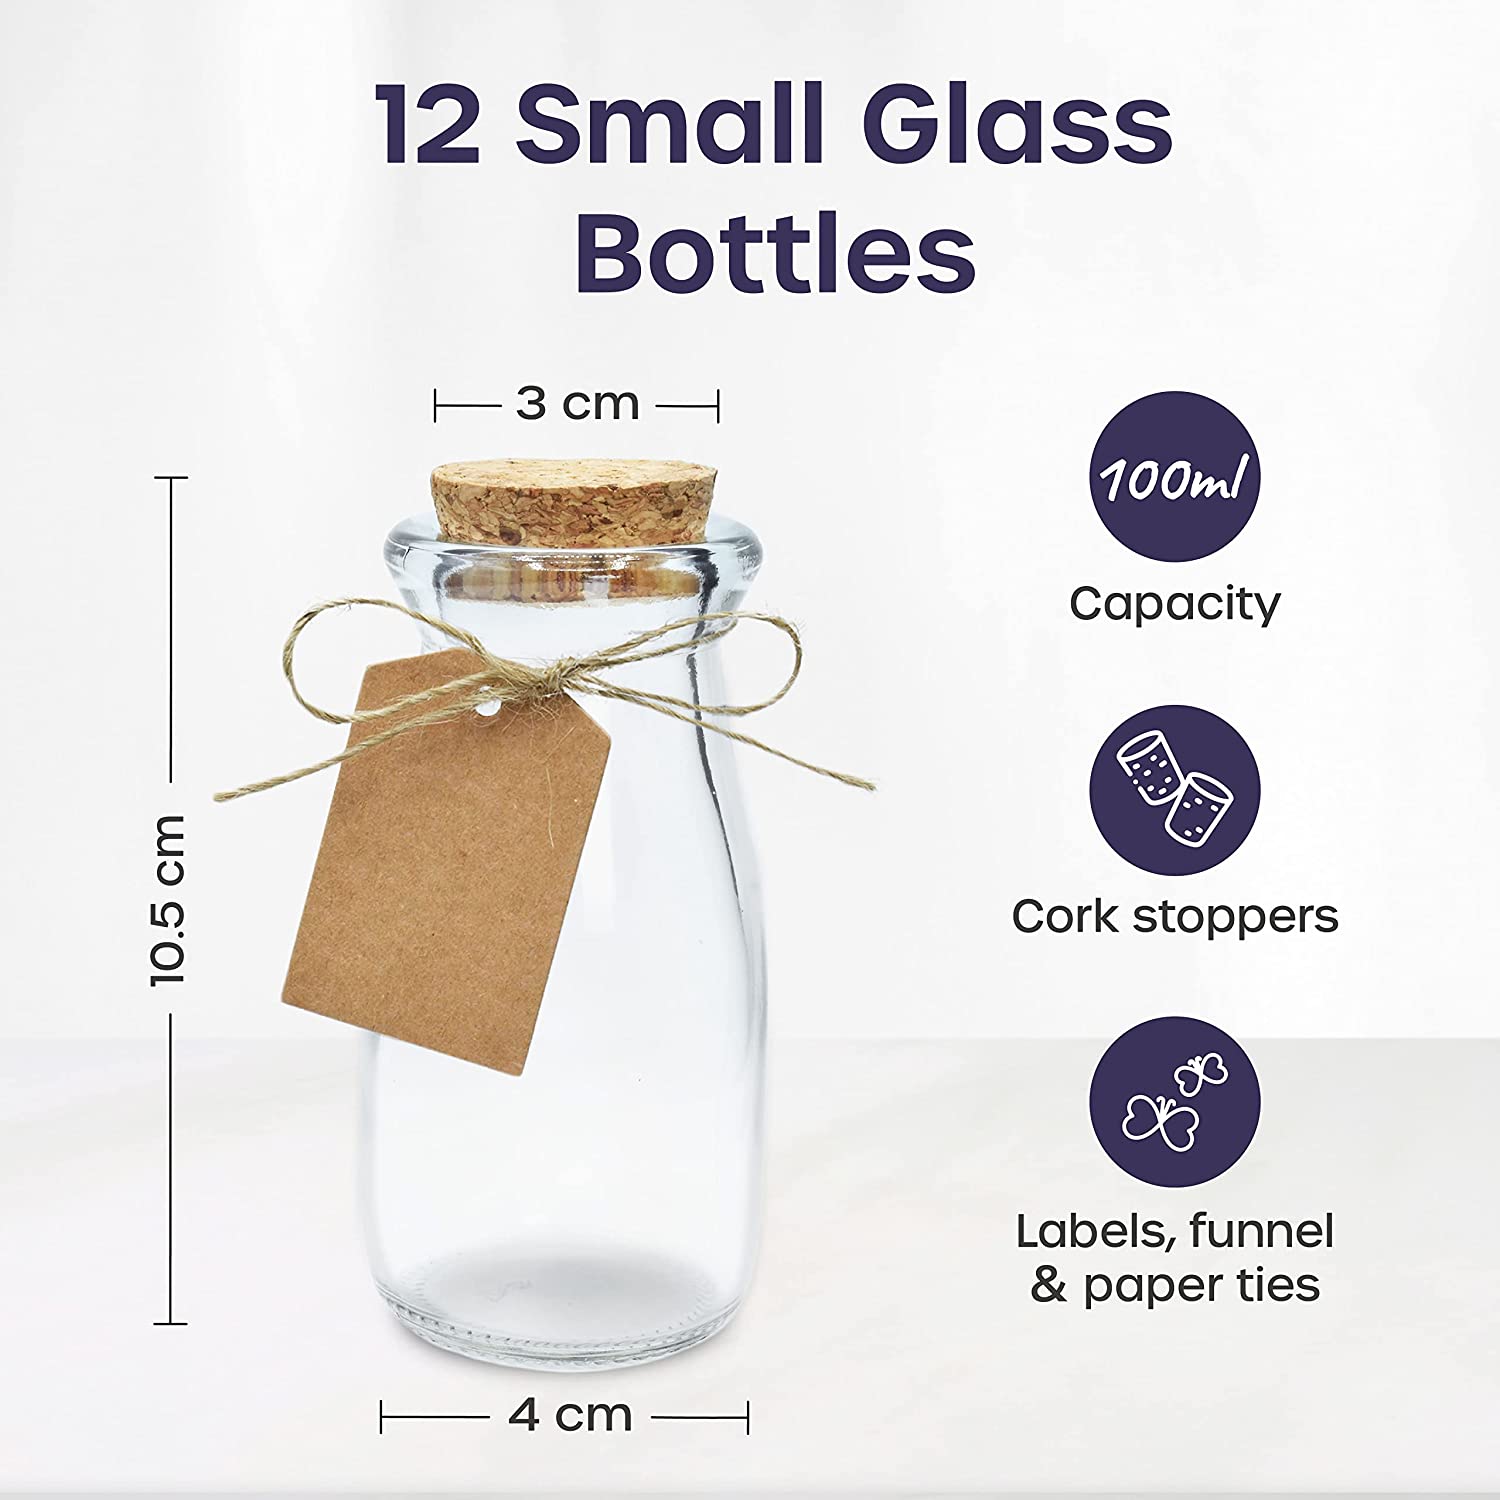 Glass Jar Product Features